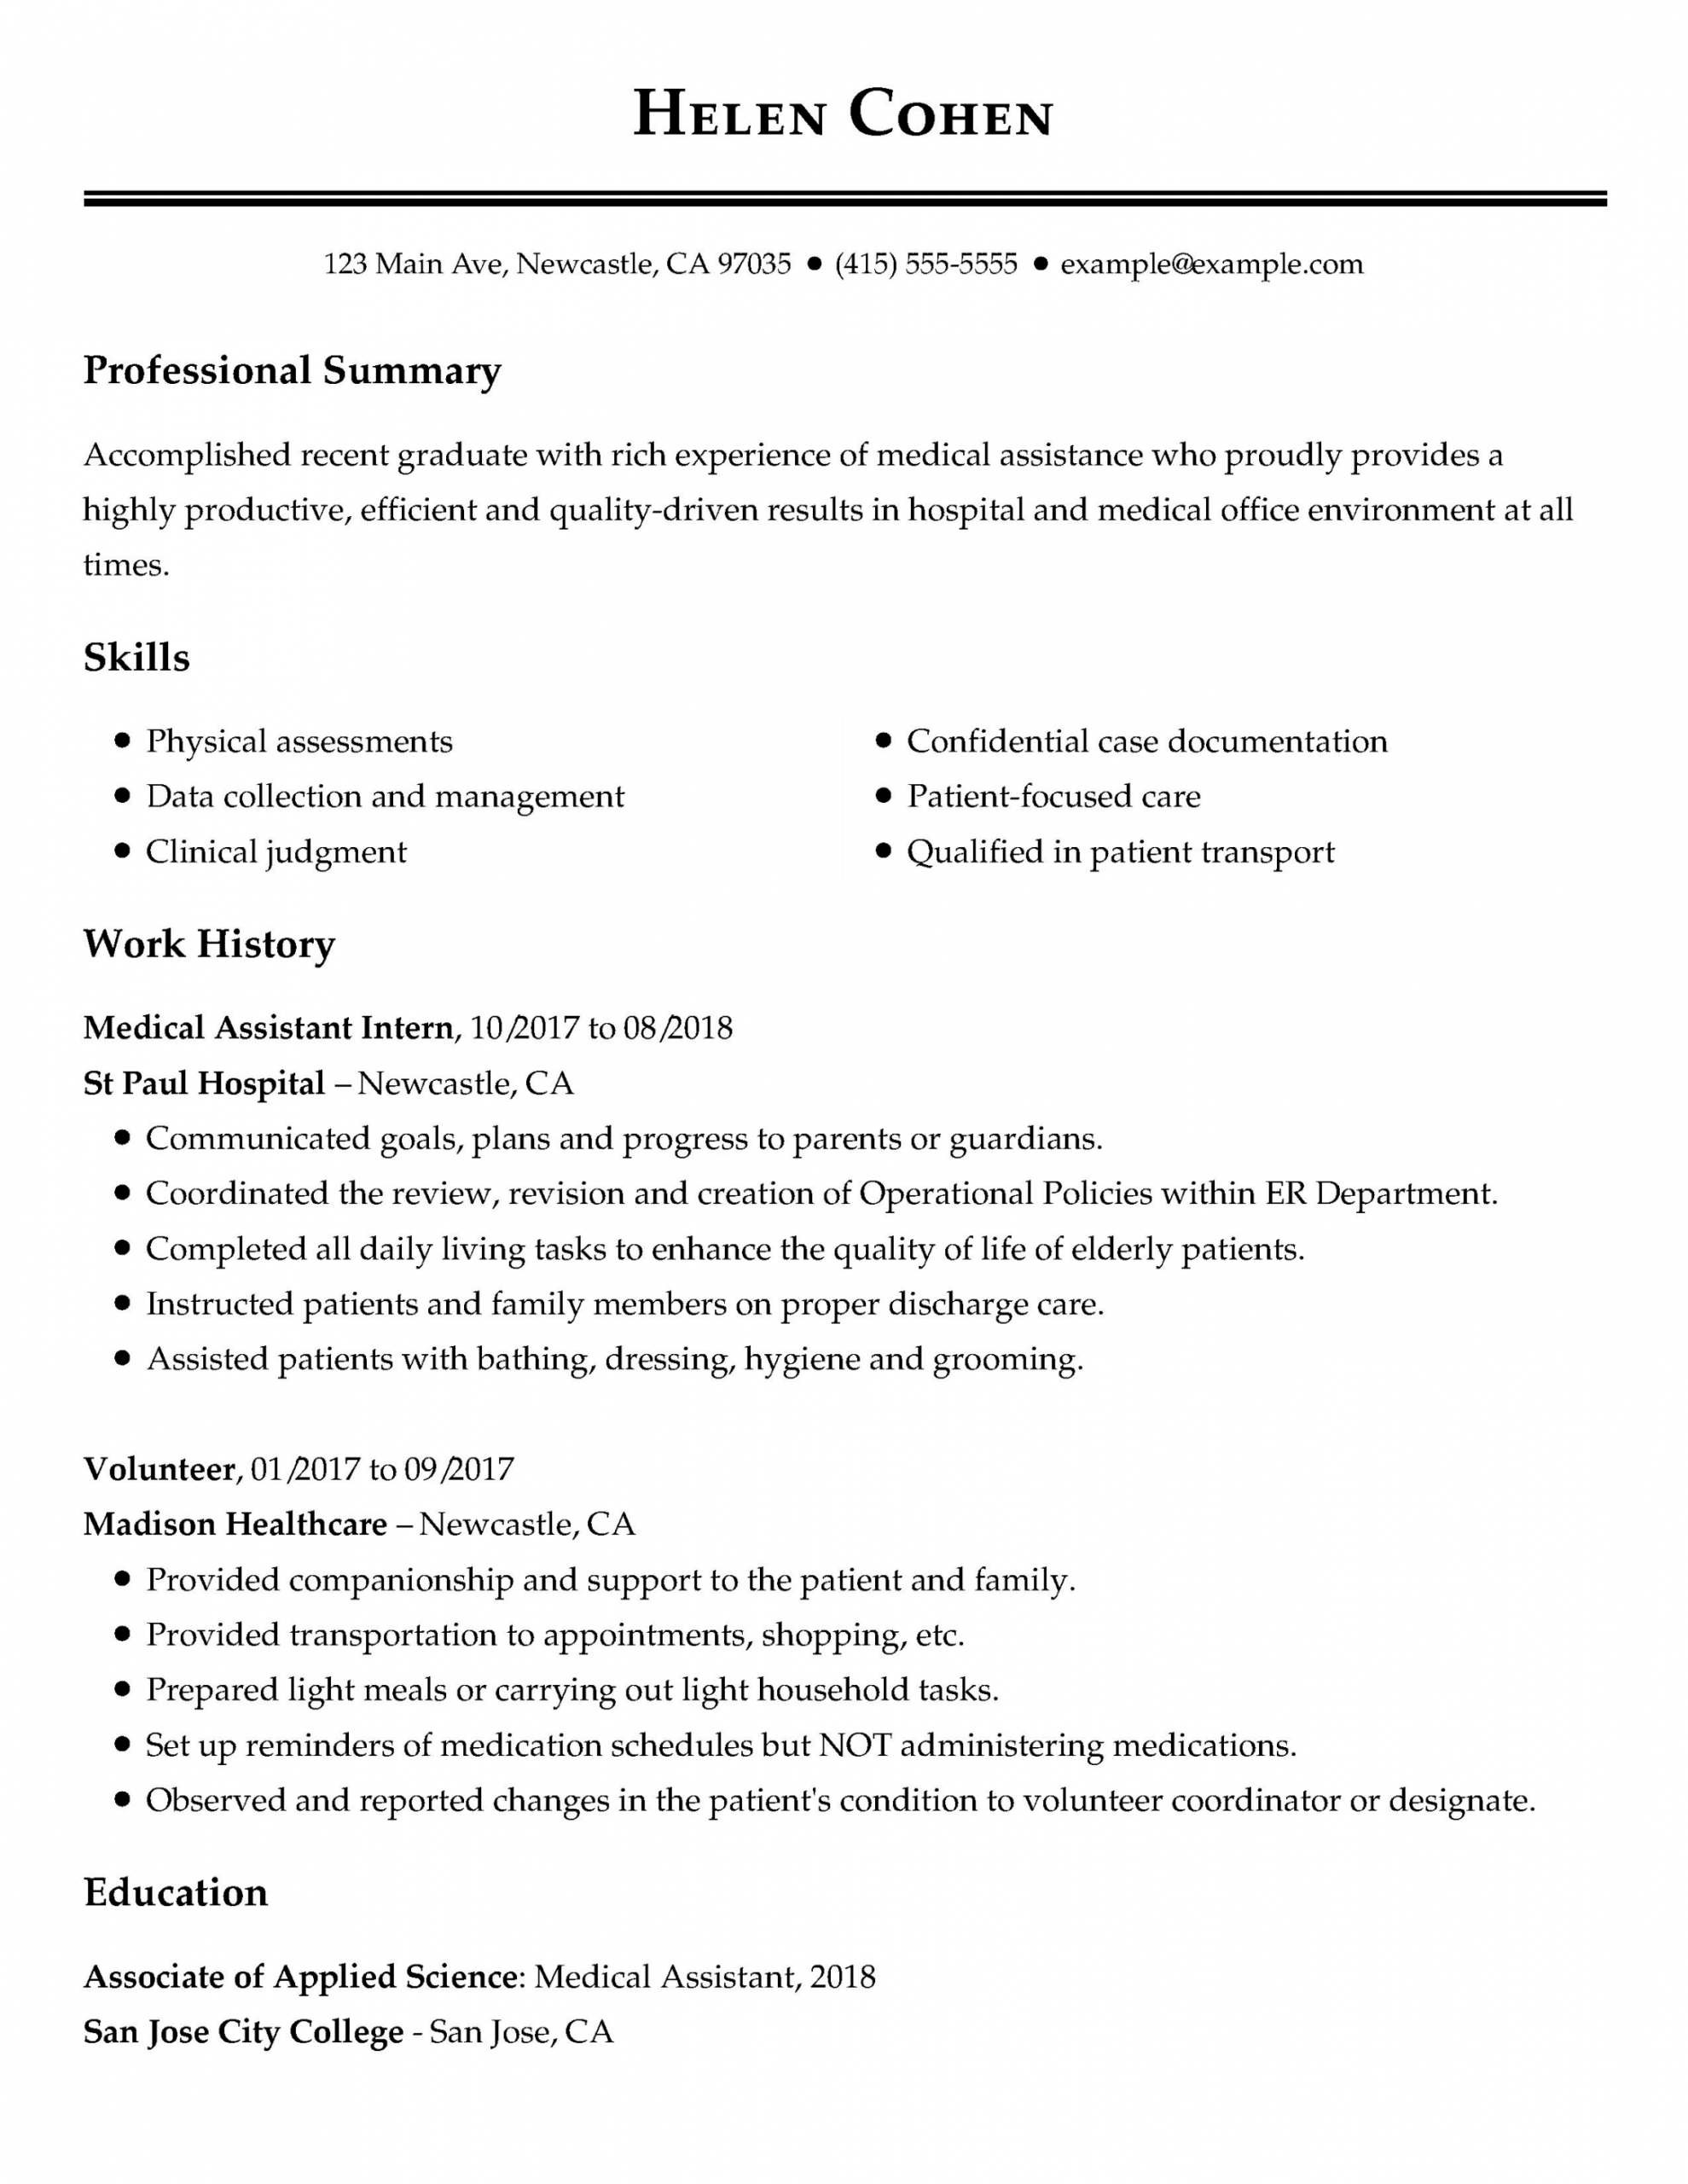 Example Of A Professional Summary On A Resume